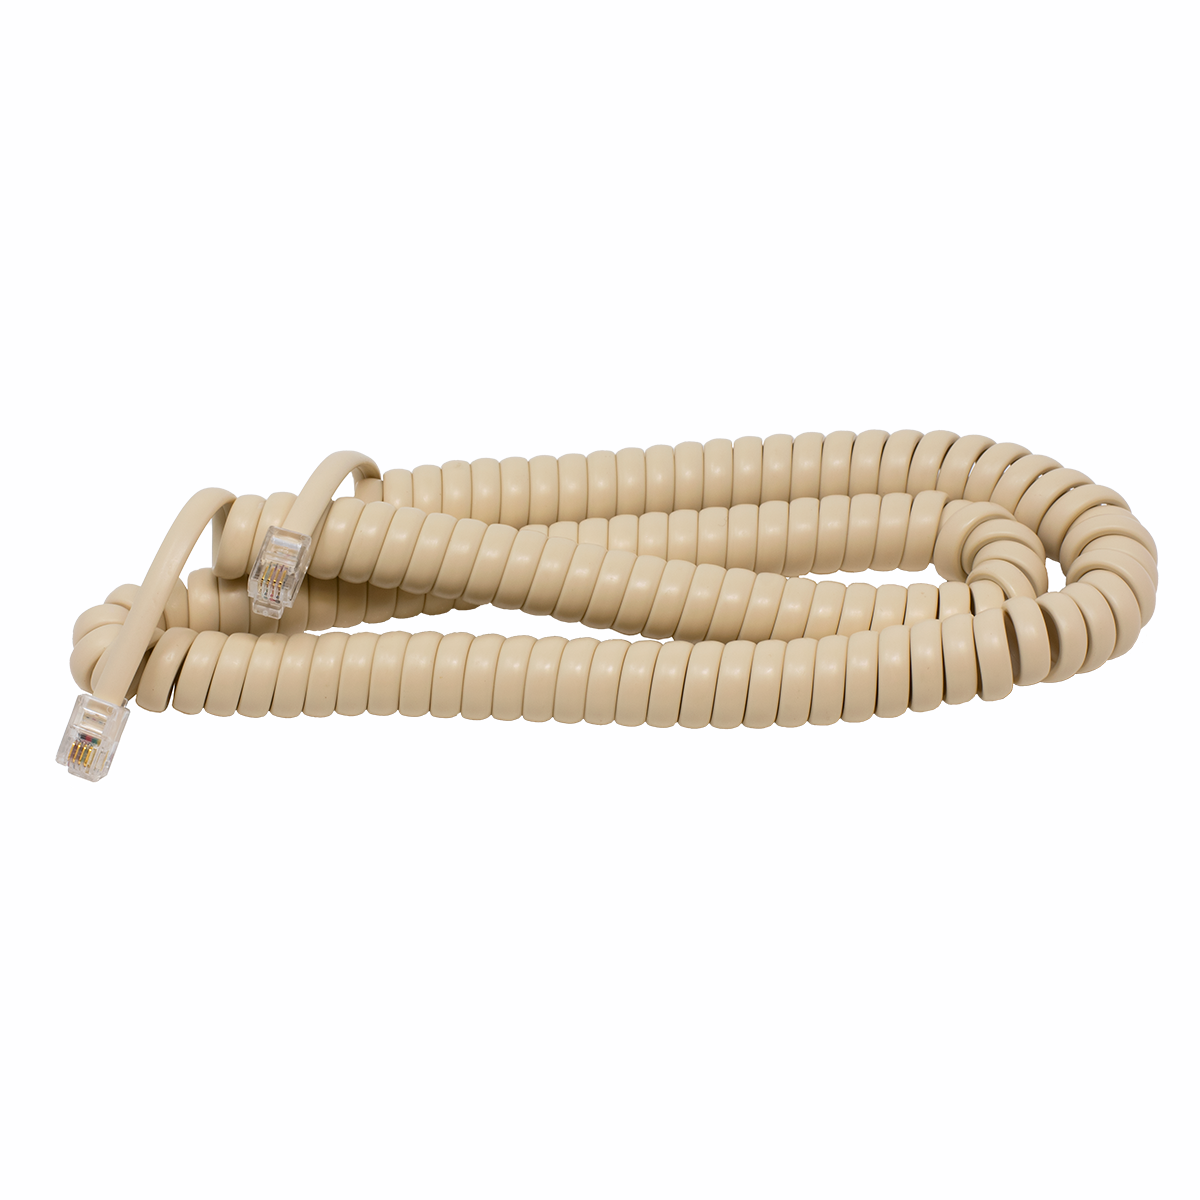 12' Ivory Coiled Handset Cord